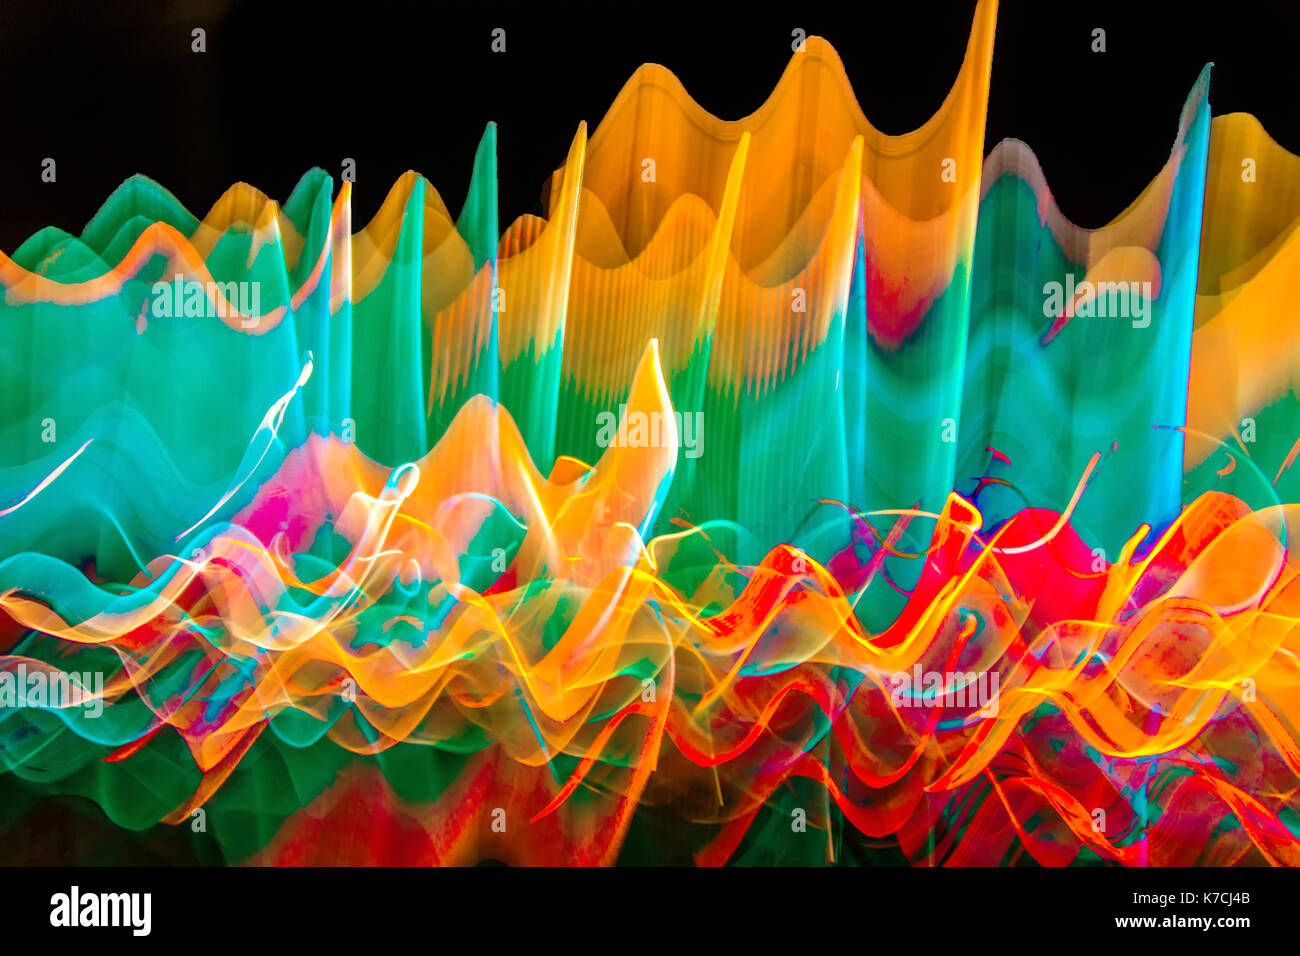 Abstract photo of wavy color lights in motion with a black background.. Stock Photo